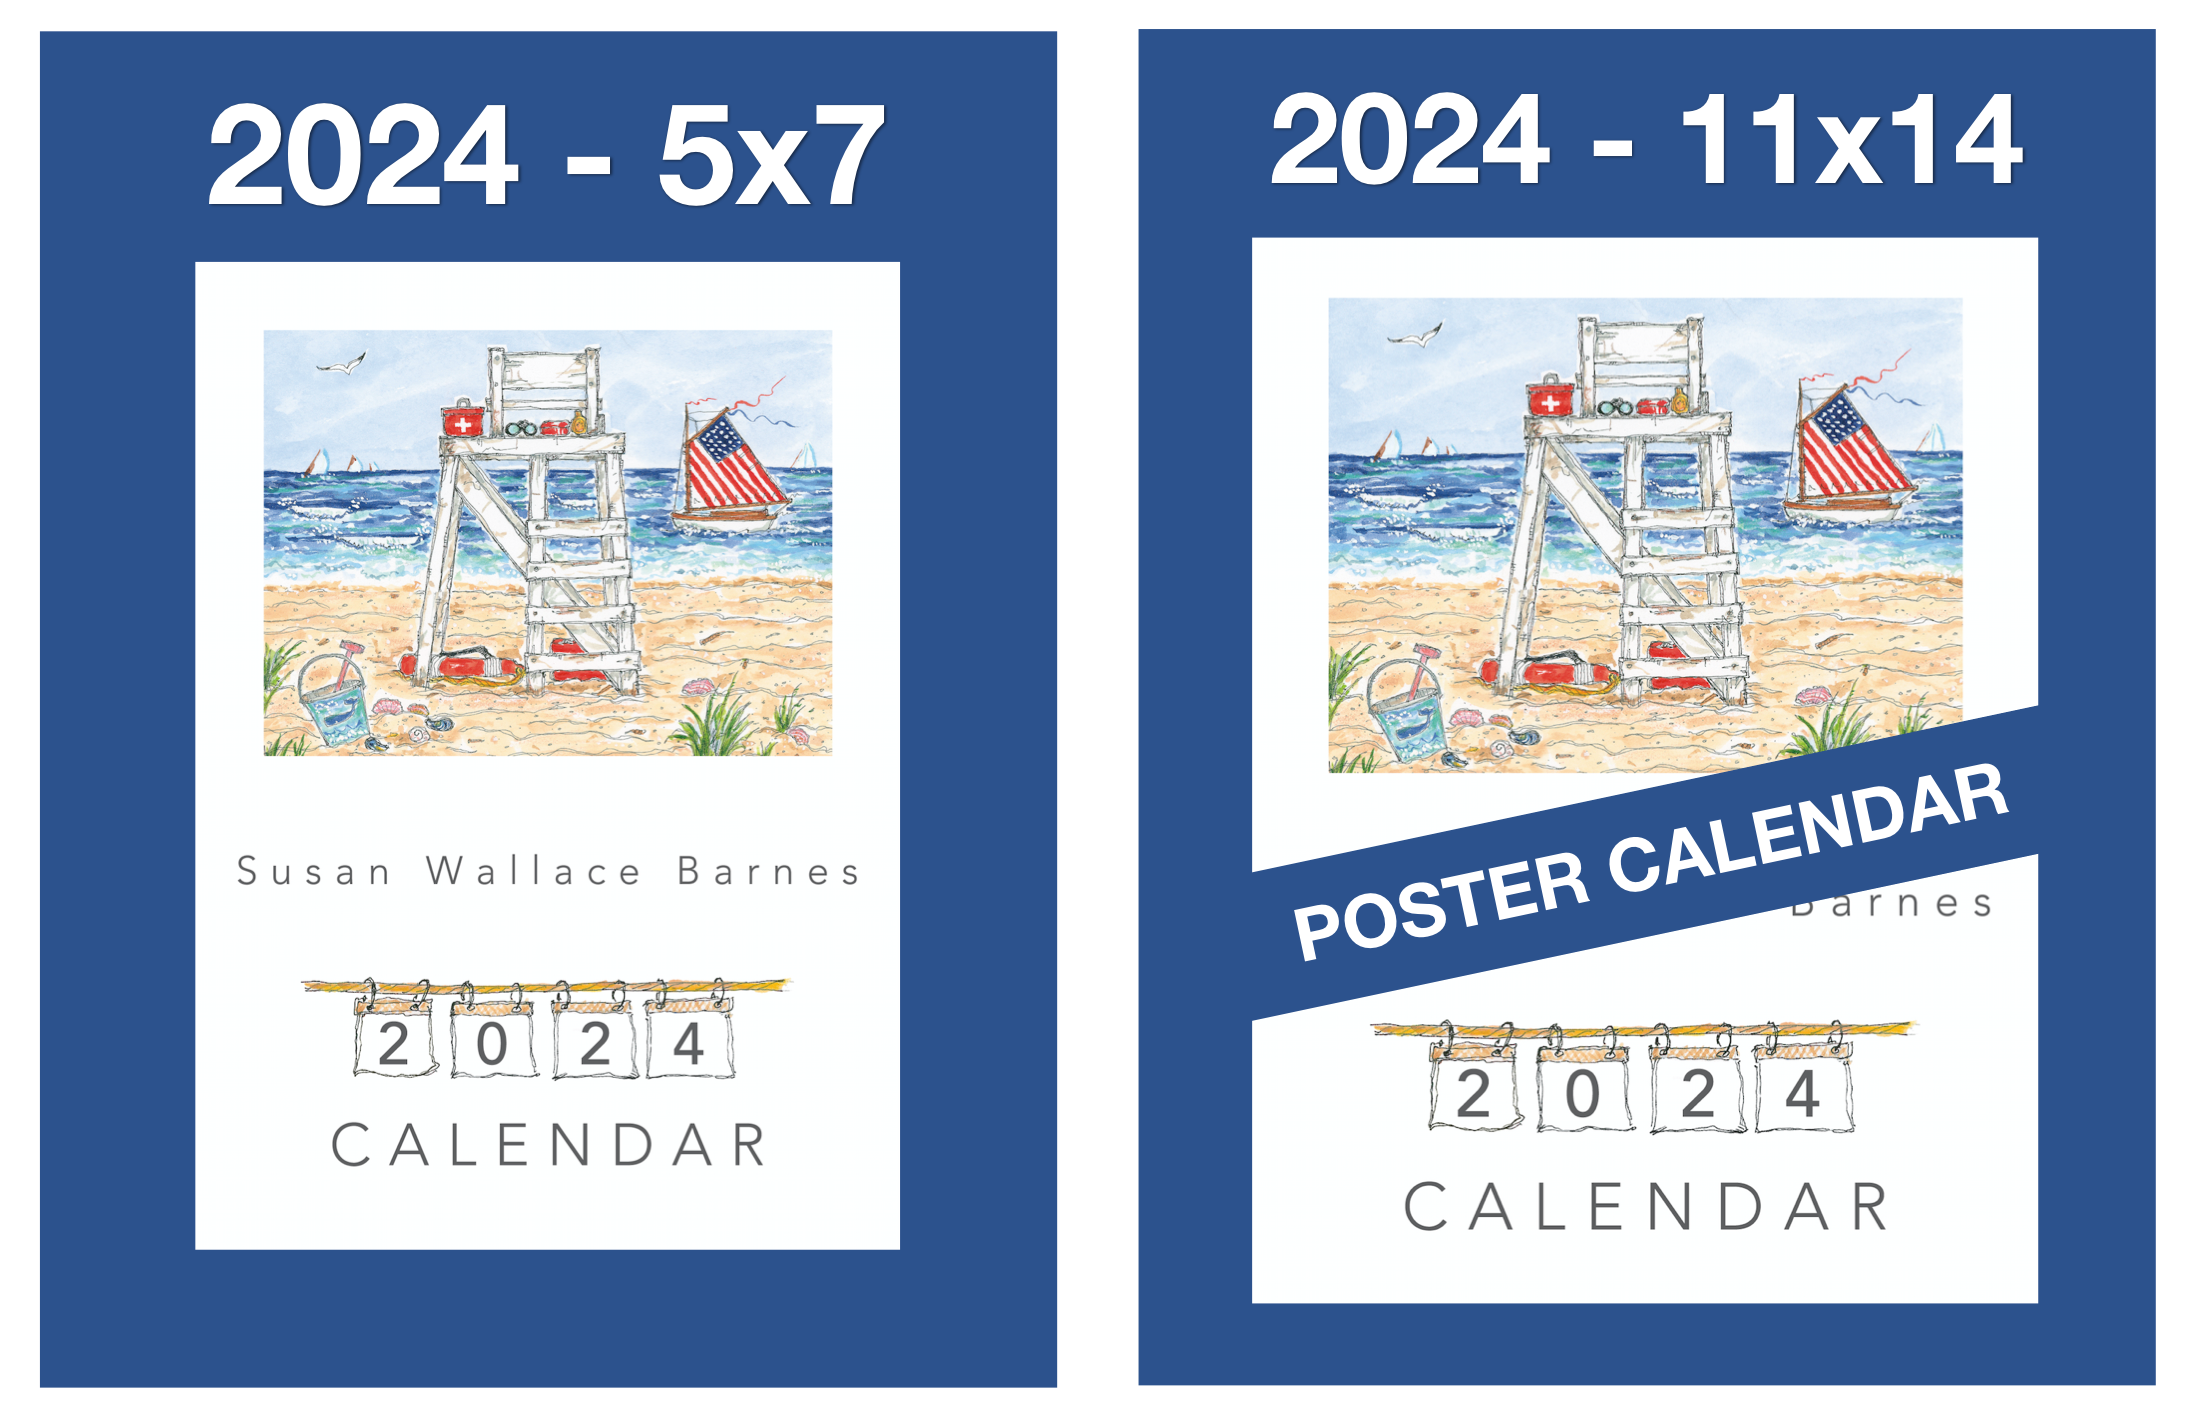 NEW 2024 SWB CALENDAR COLLECTIONS NOW AVAILABLE! SUSAN WALLACE BARNES